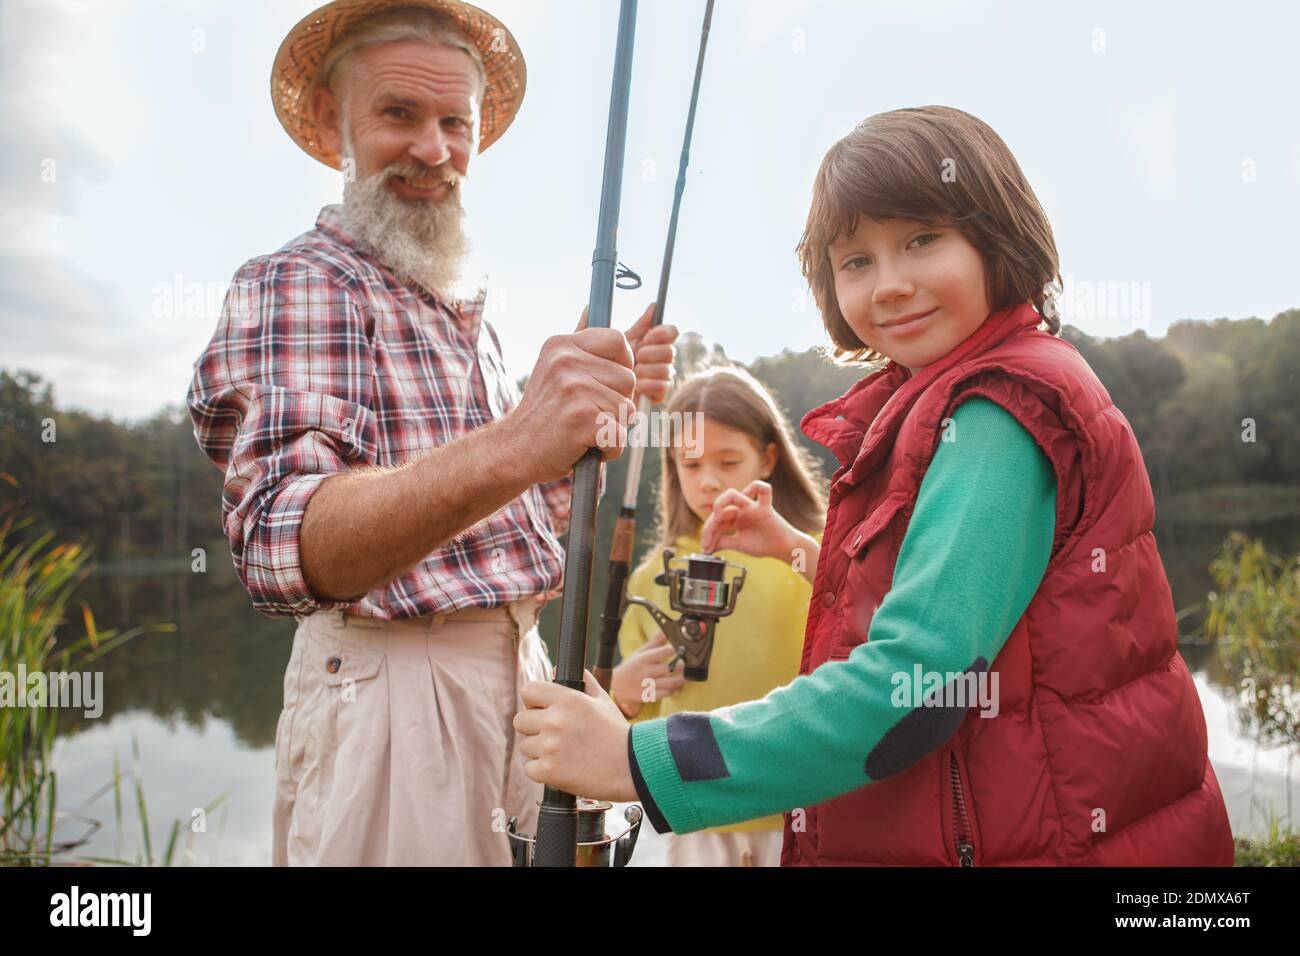 Cute happy young boy smiling to the camera, enjoying fishing with his grandfather and sister on the lake Stock Photo